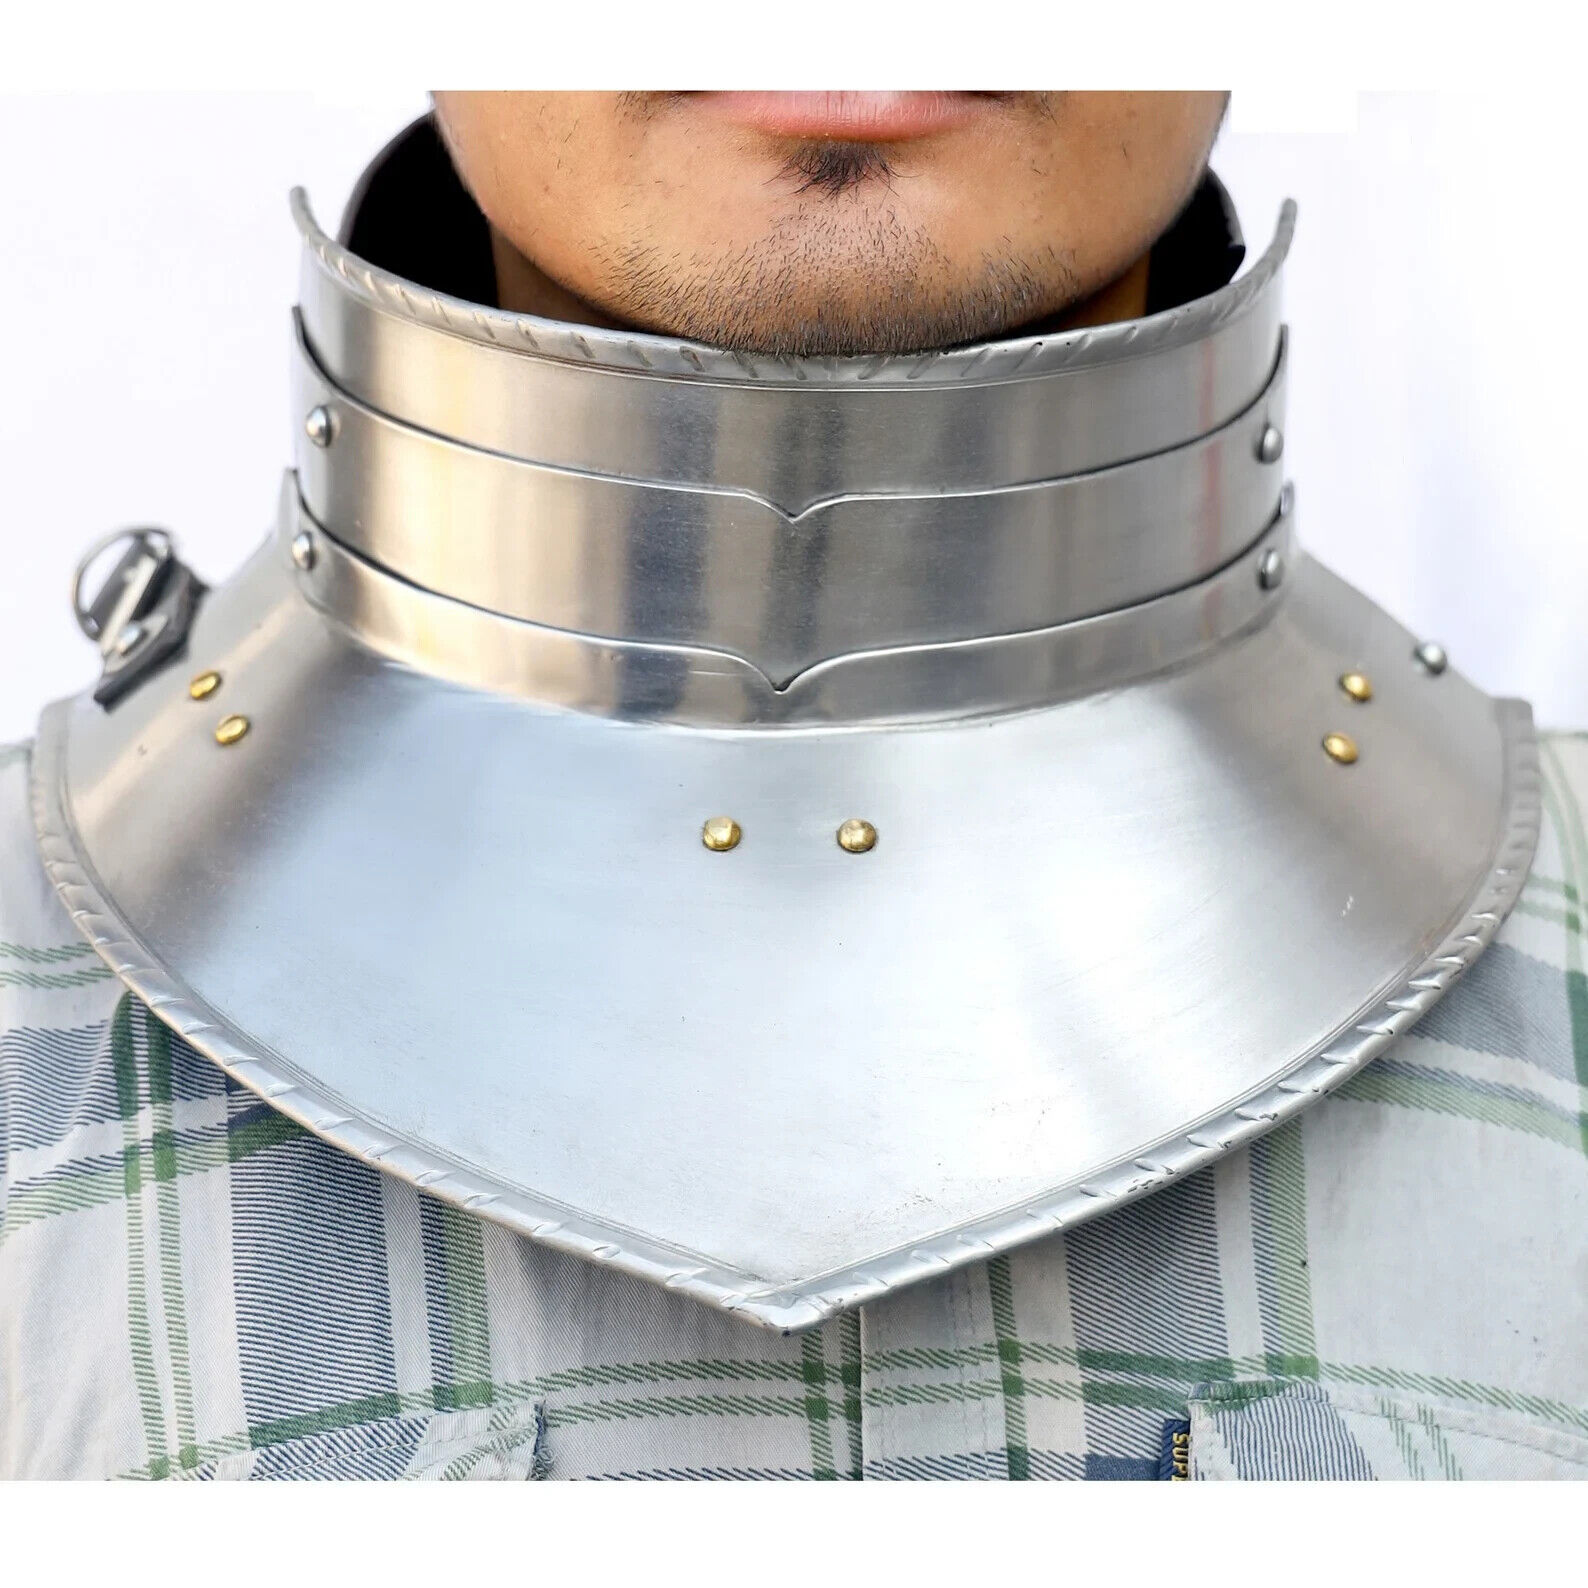 Medieval Knight Armor Steel Gorget Neck Protection w/ Adjustable Leather Strap